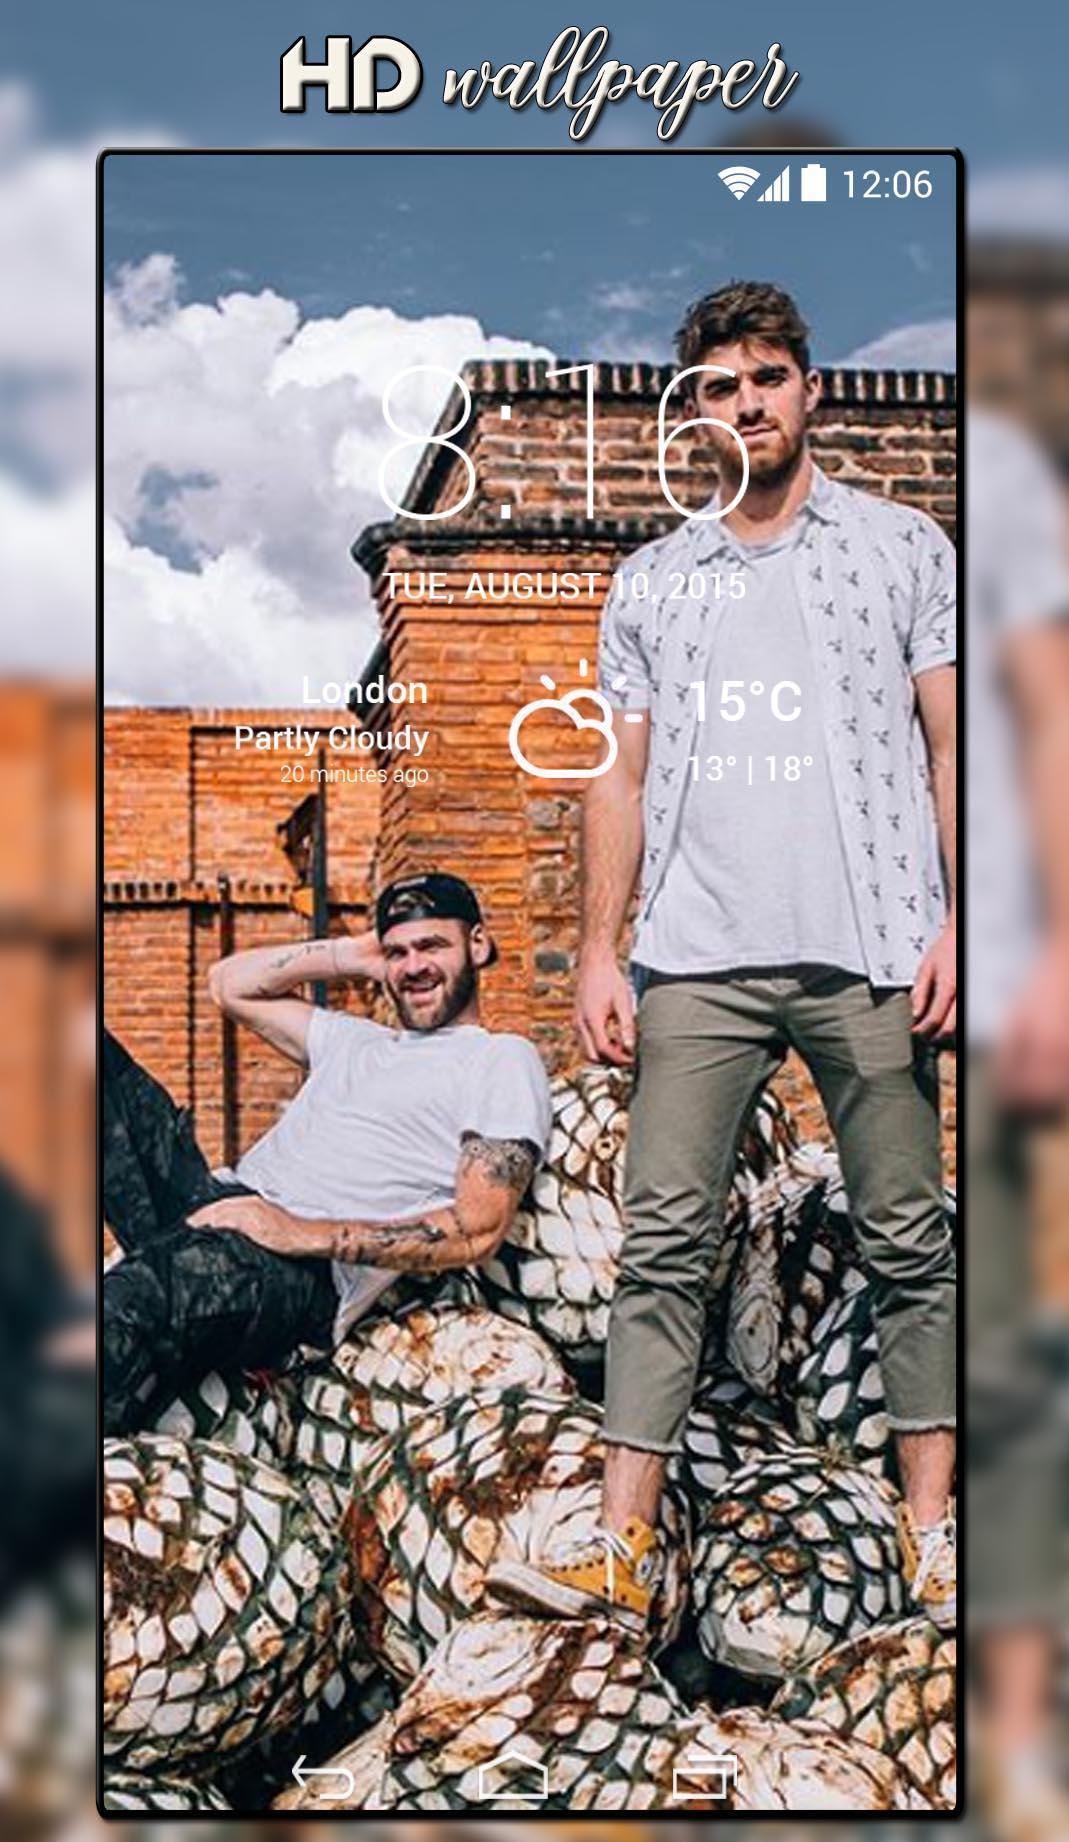 Chainsmokers Hd Wallpaper Download